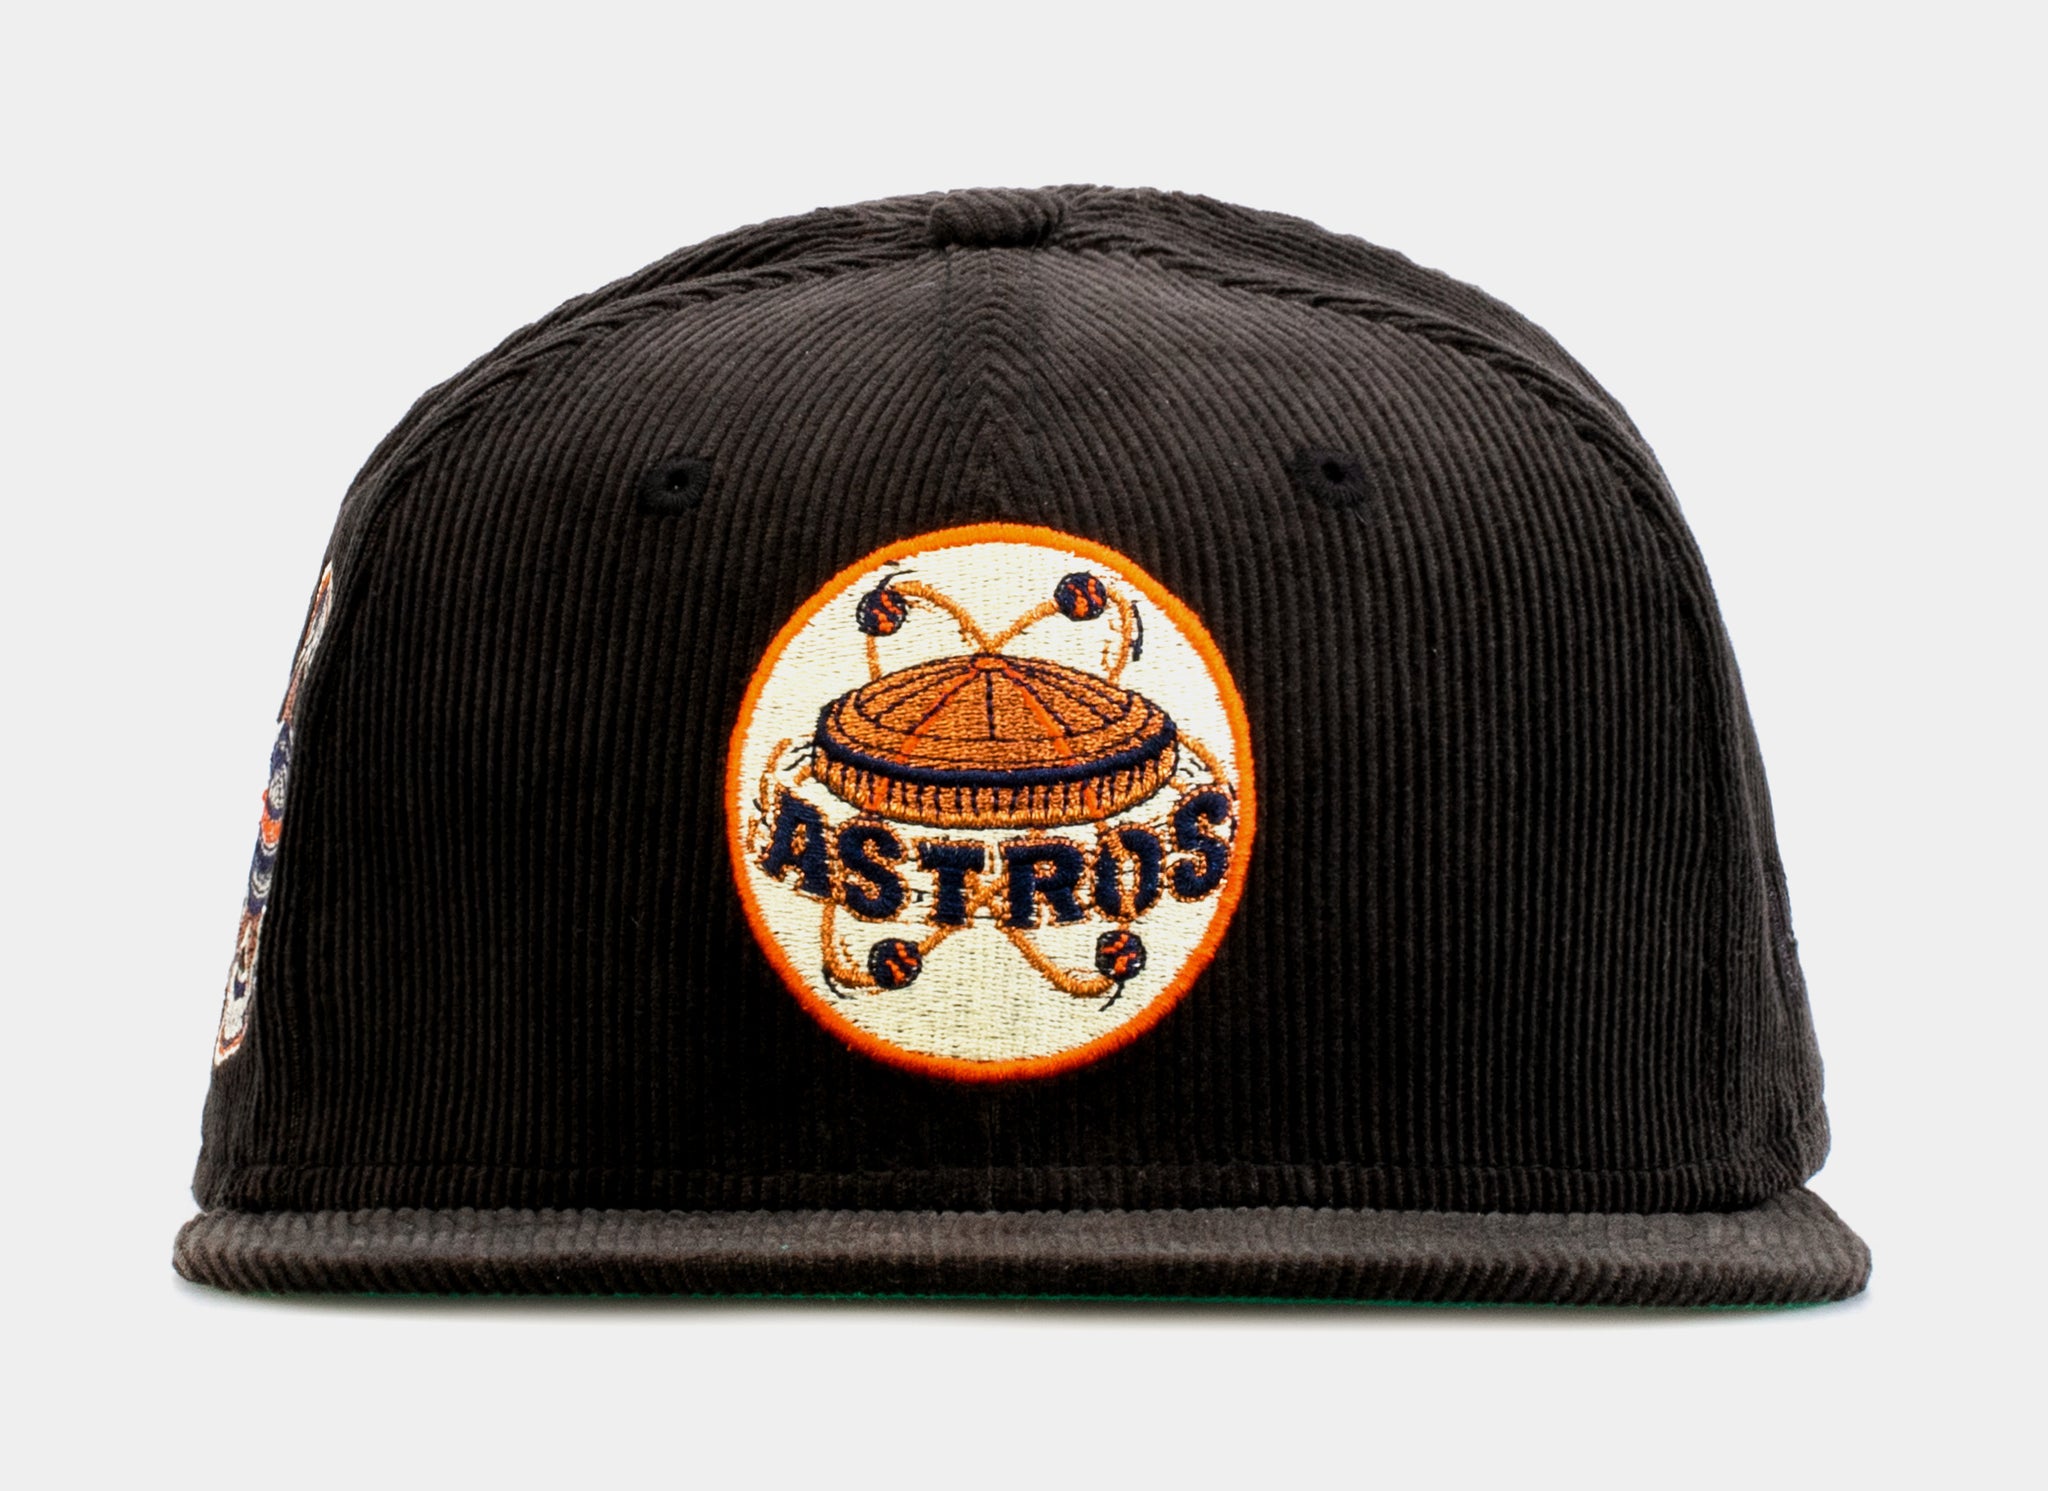 New Era SP Exclusive Black Corduroy Houston Astros 59FIFTY Mens Fitted Hat (Black)